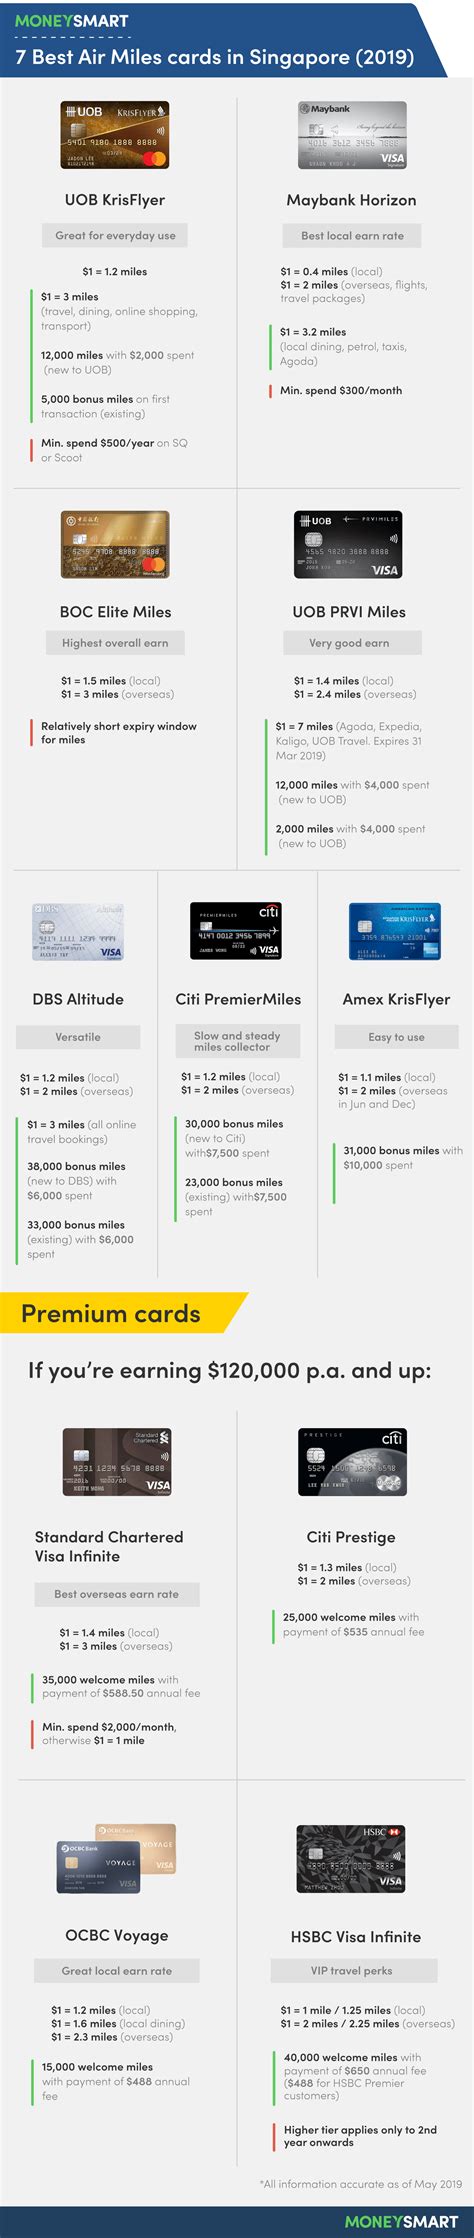 5 tips for choosing the best airline miles credit card. The 7 Best Air Miles Credit Cards in Singapore (2019)